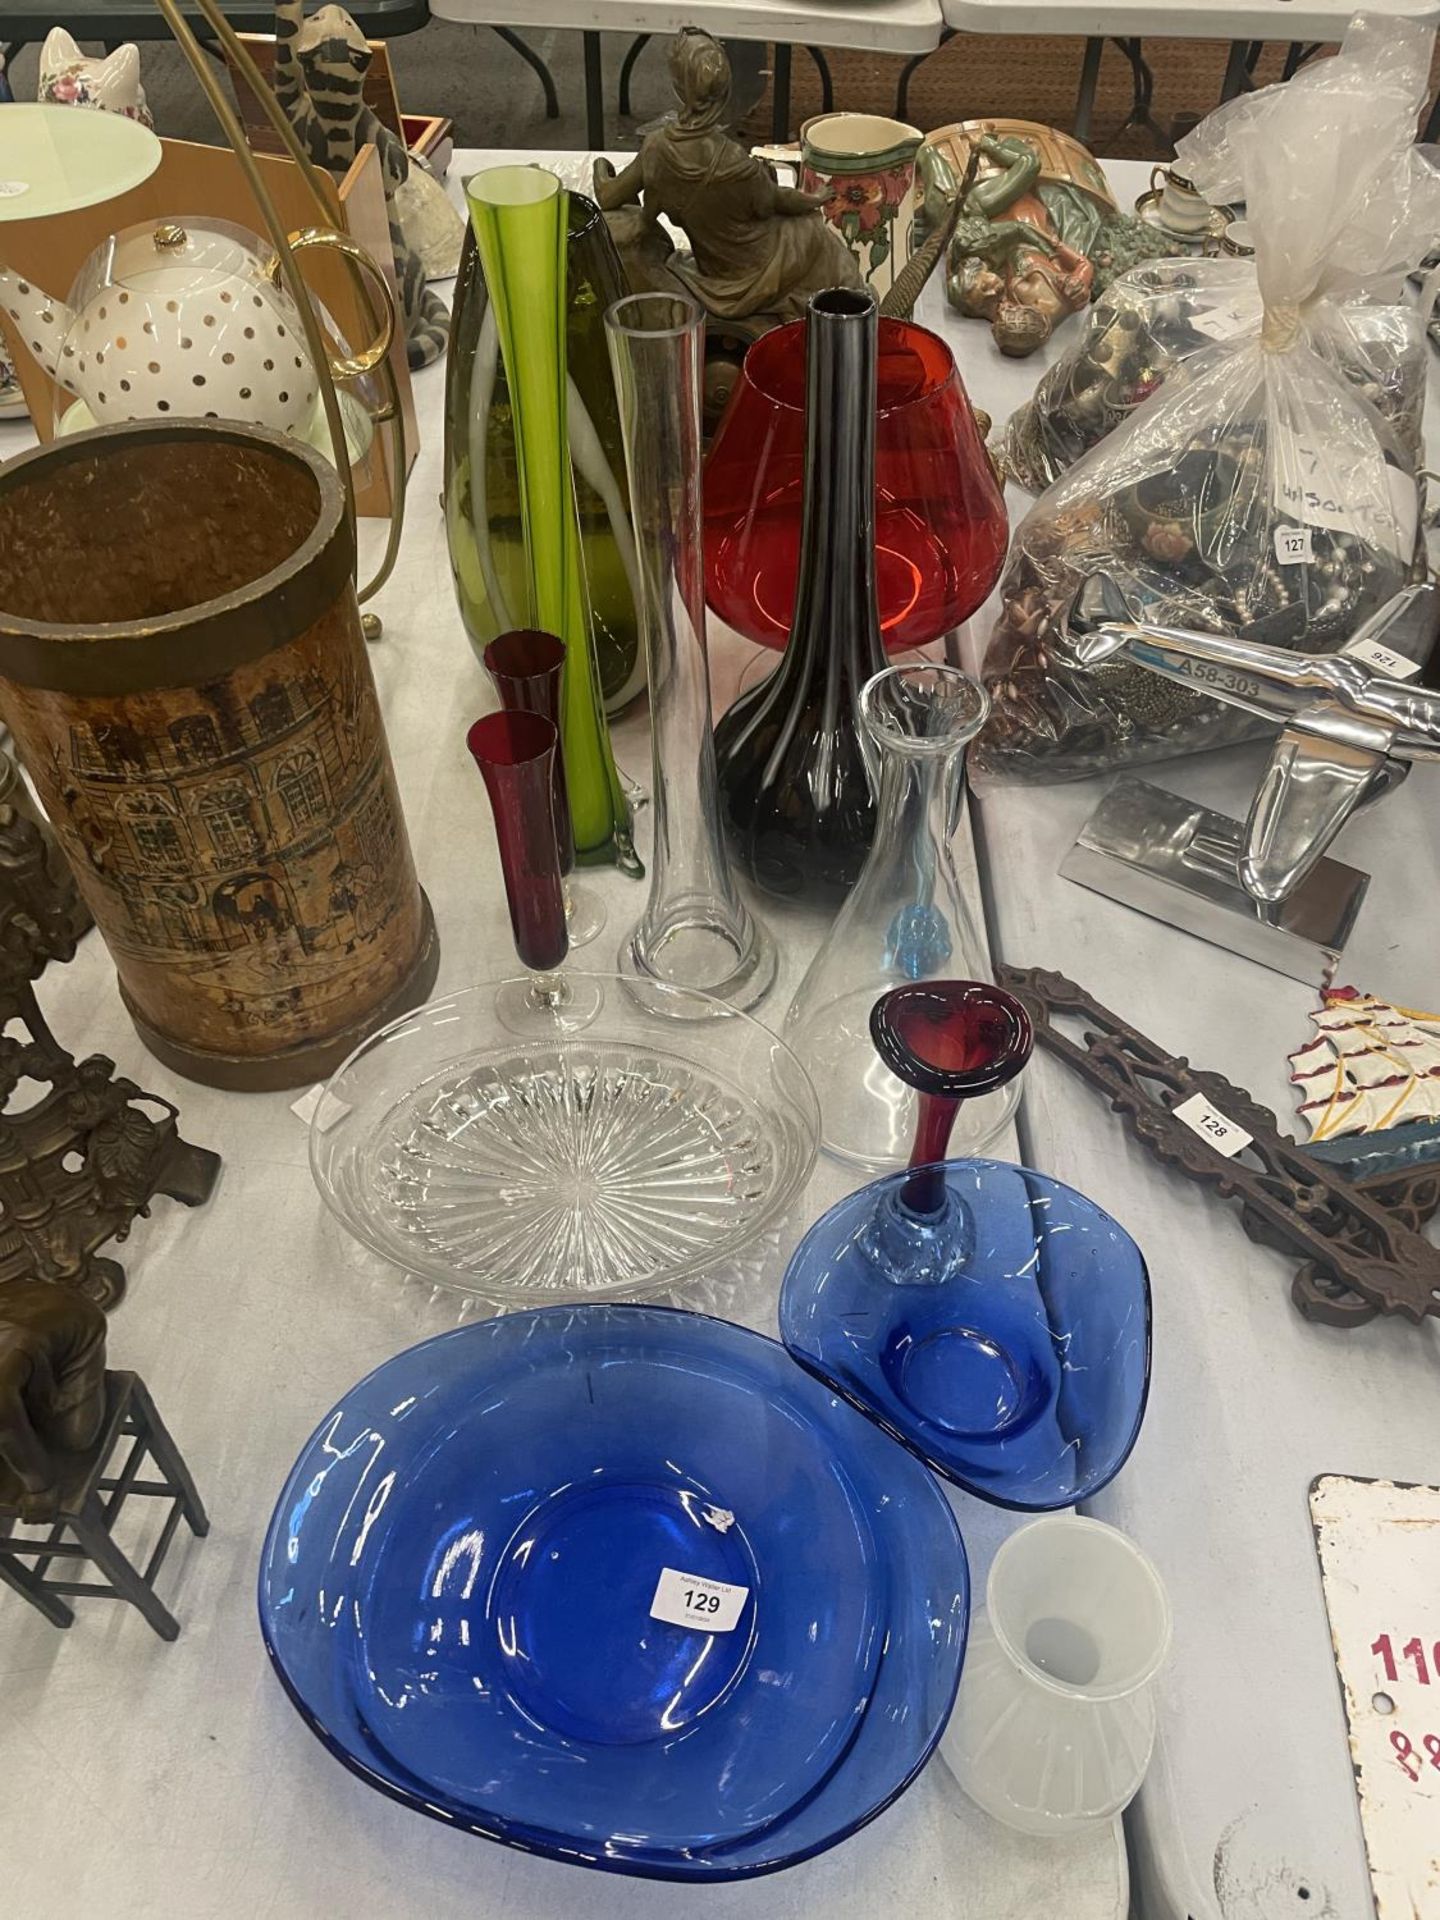 A LARGE QUANTITY OF GLASSWARE TO INCLUDE ART GLASS VASES, BOWLS, ETC